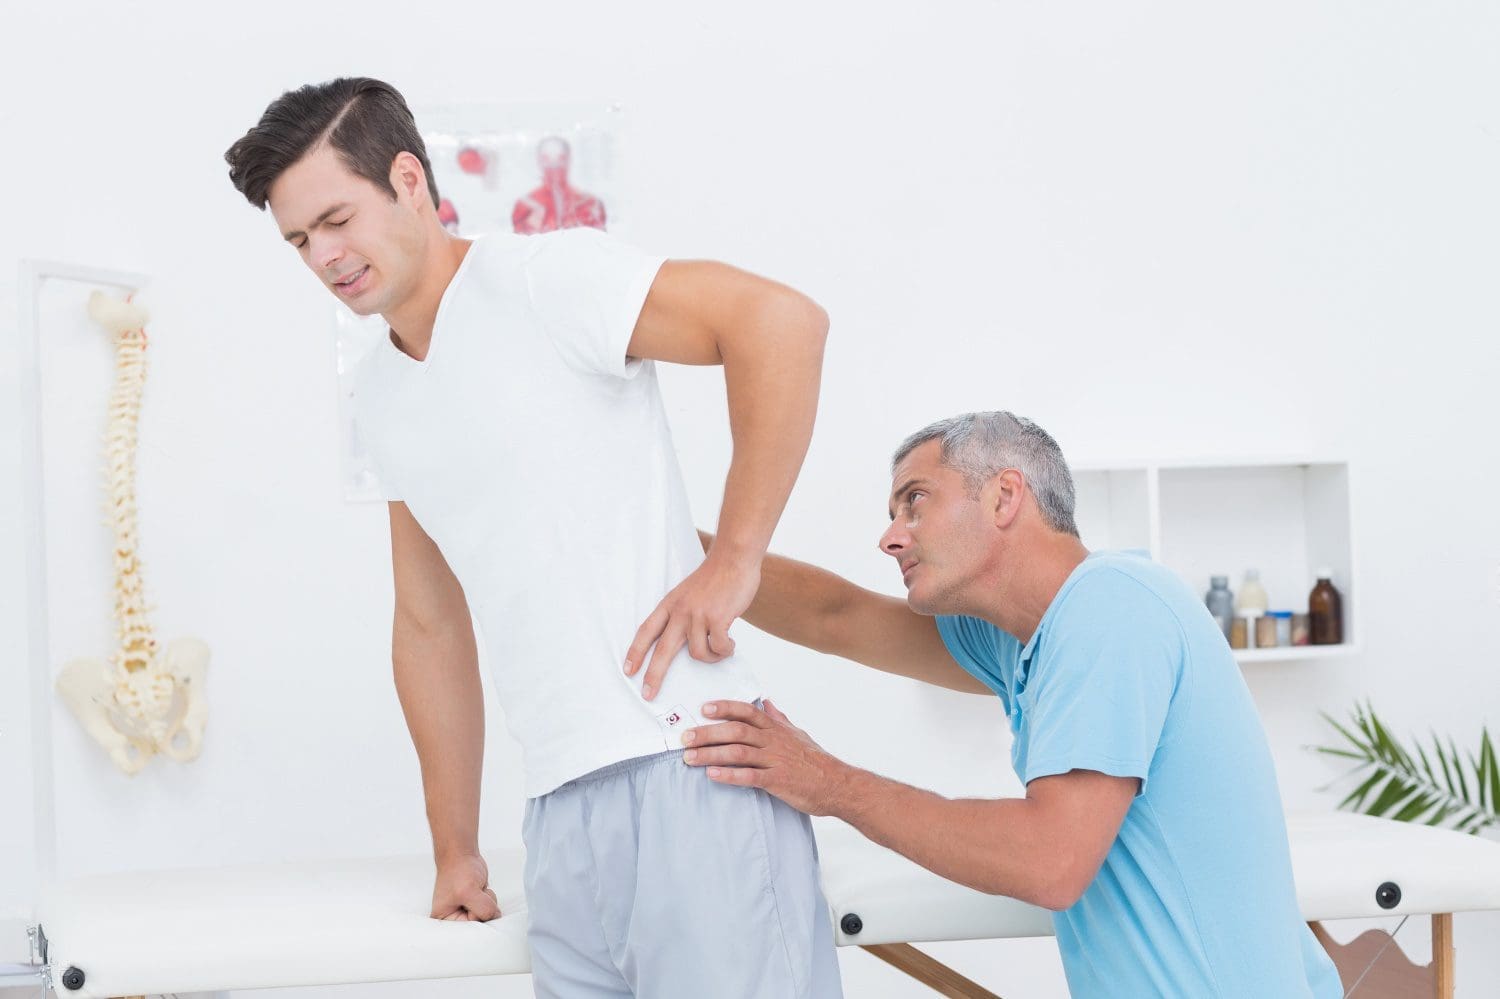 chiropractic care back pain el paso tx.